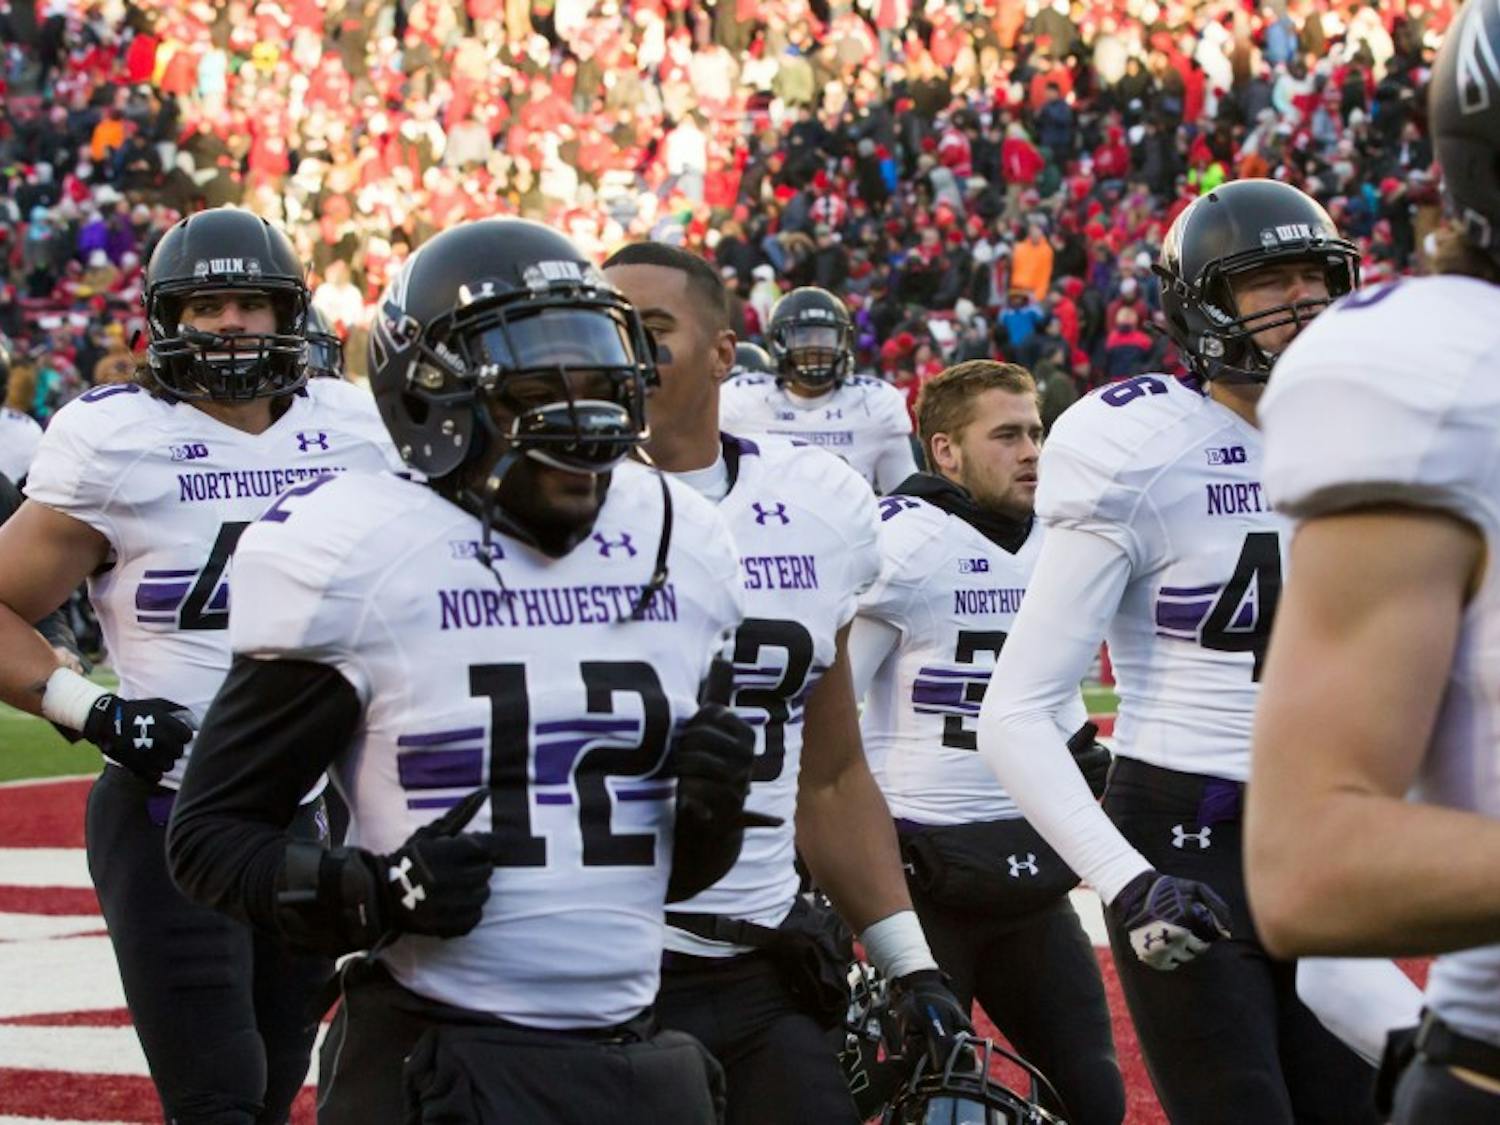 Northwestern looks to put together a complete game against UW as it heads to Madison this weekend.&nbsp;